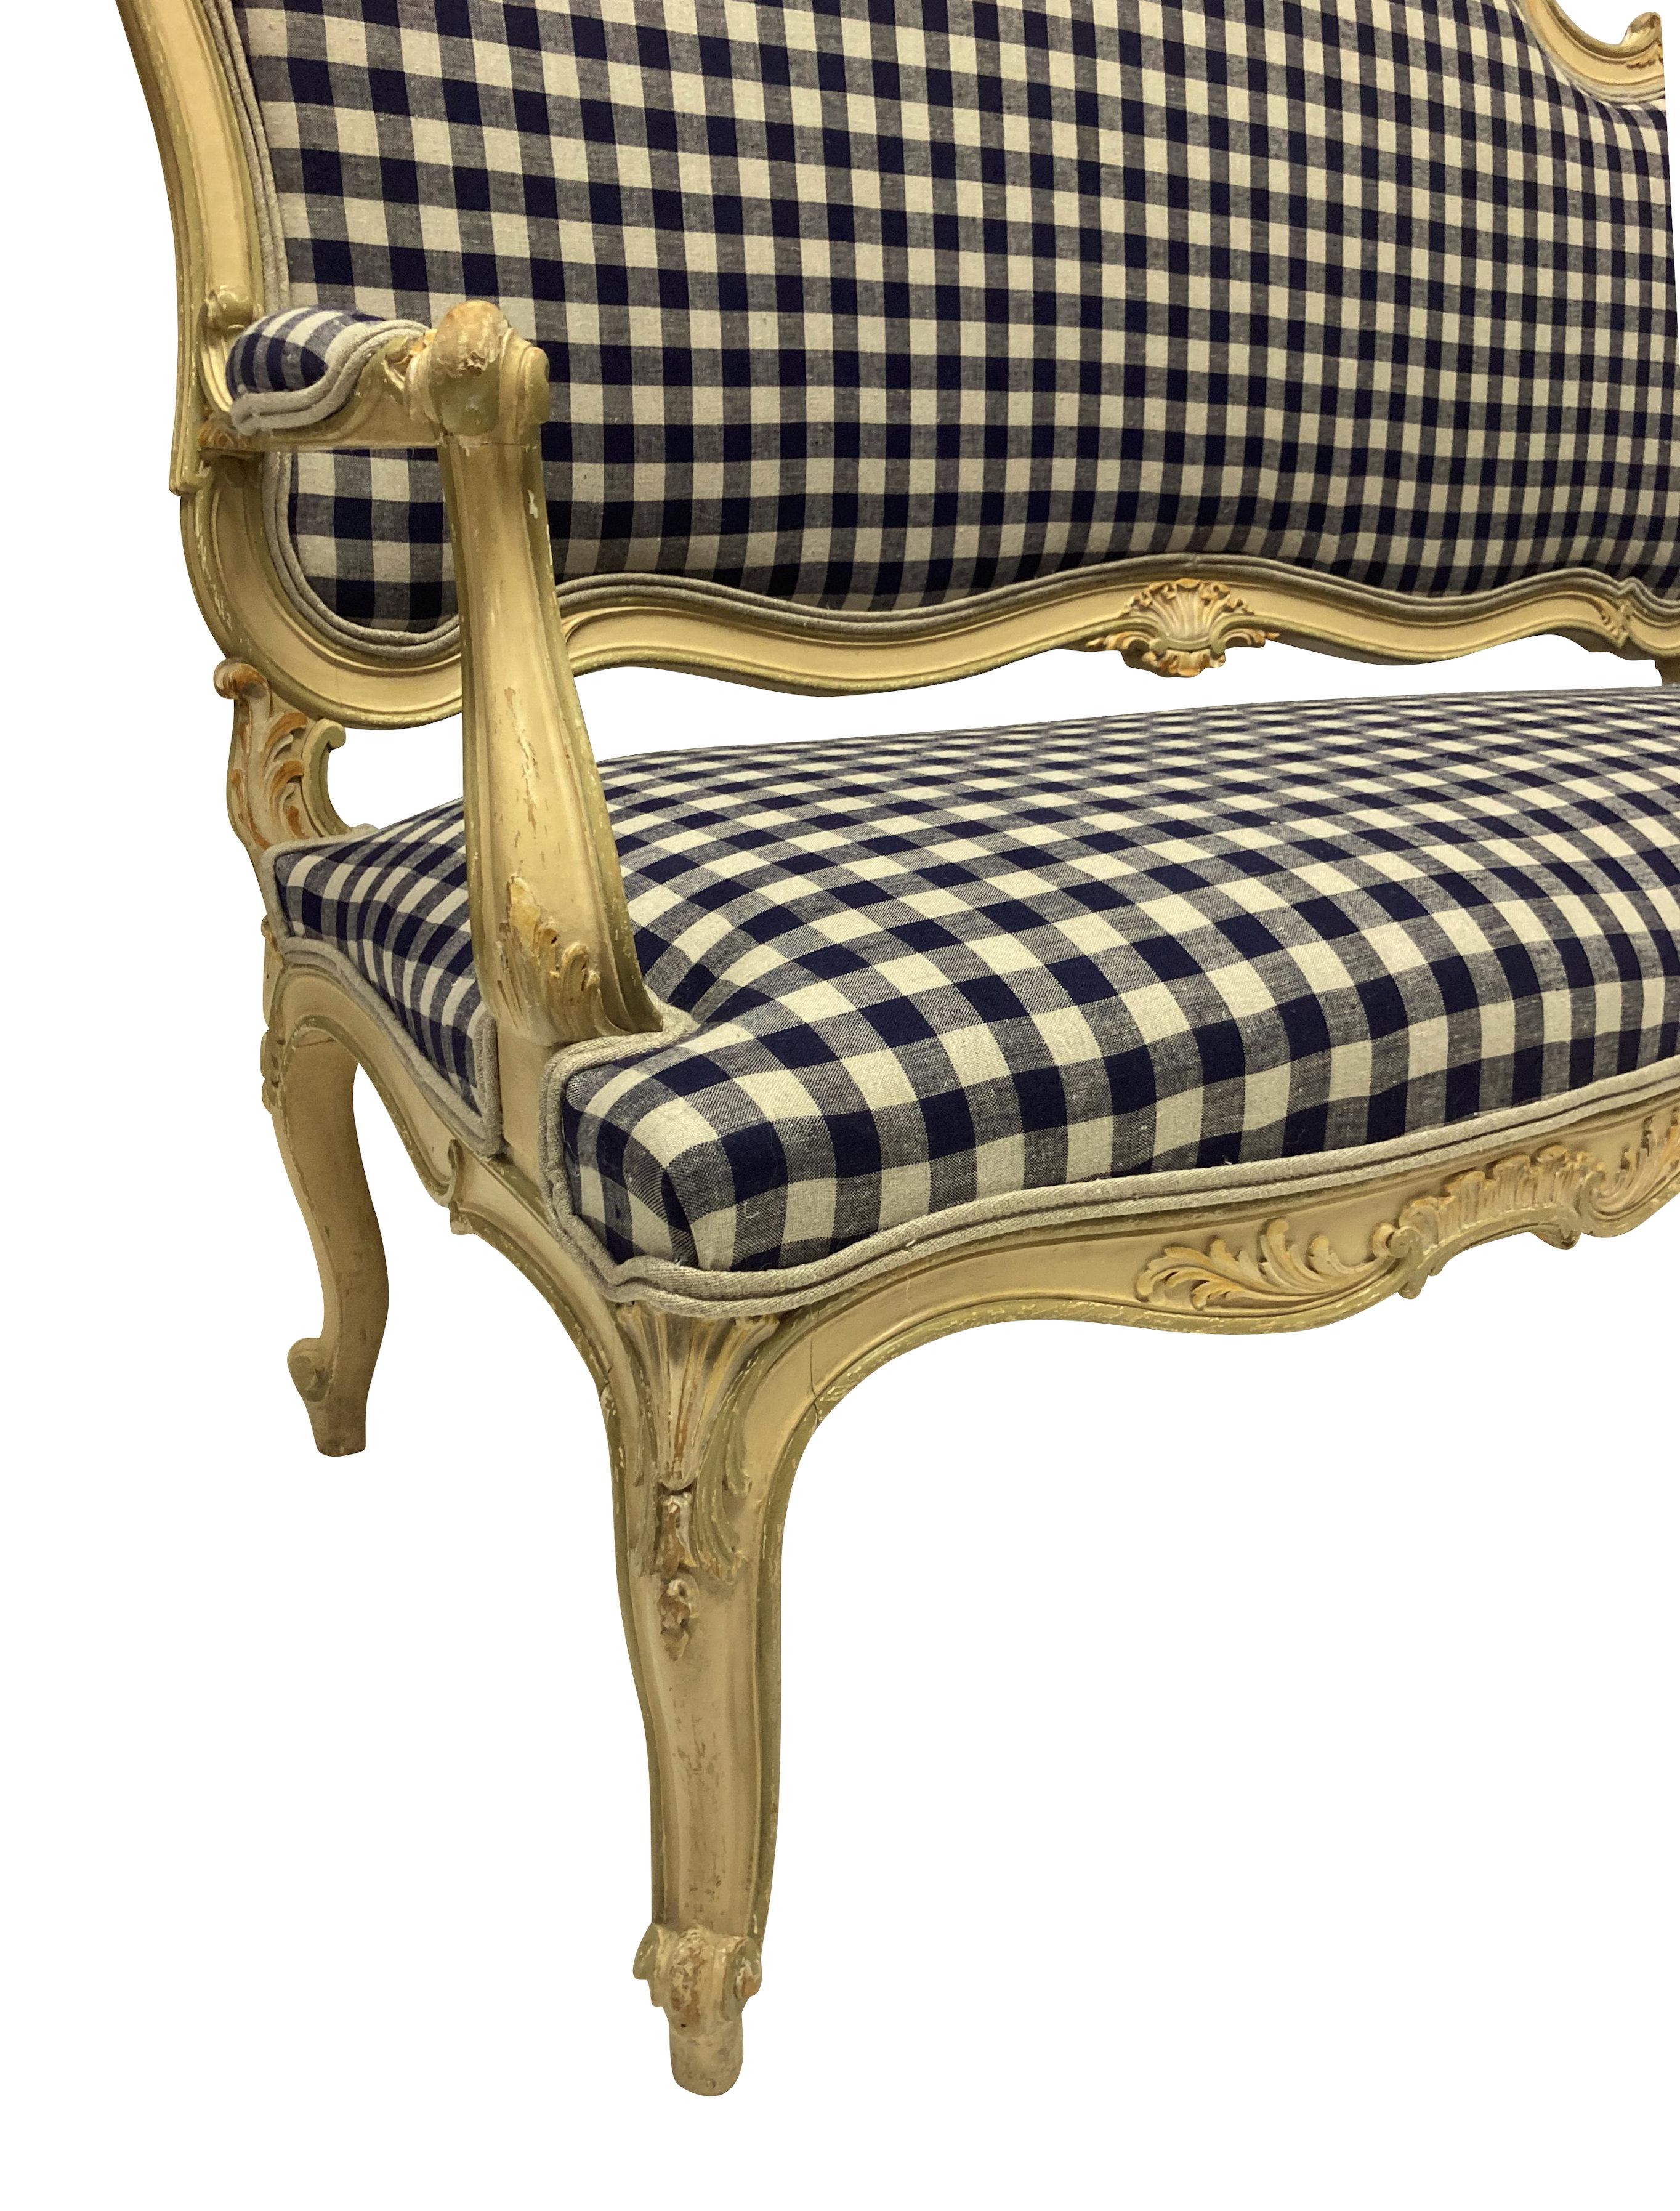 A French carved and painted Louis XV style canape, in subtle greens and yellows, newly upholstered in navy gingham linen.